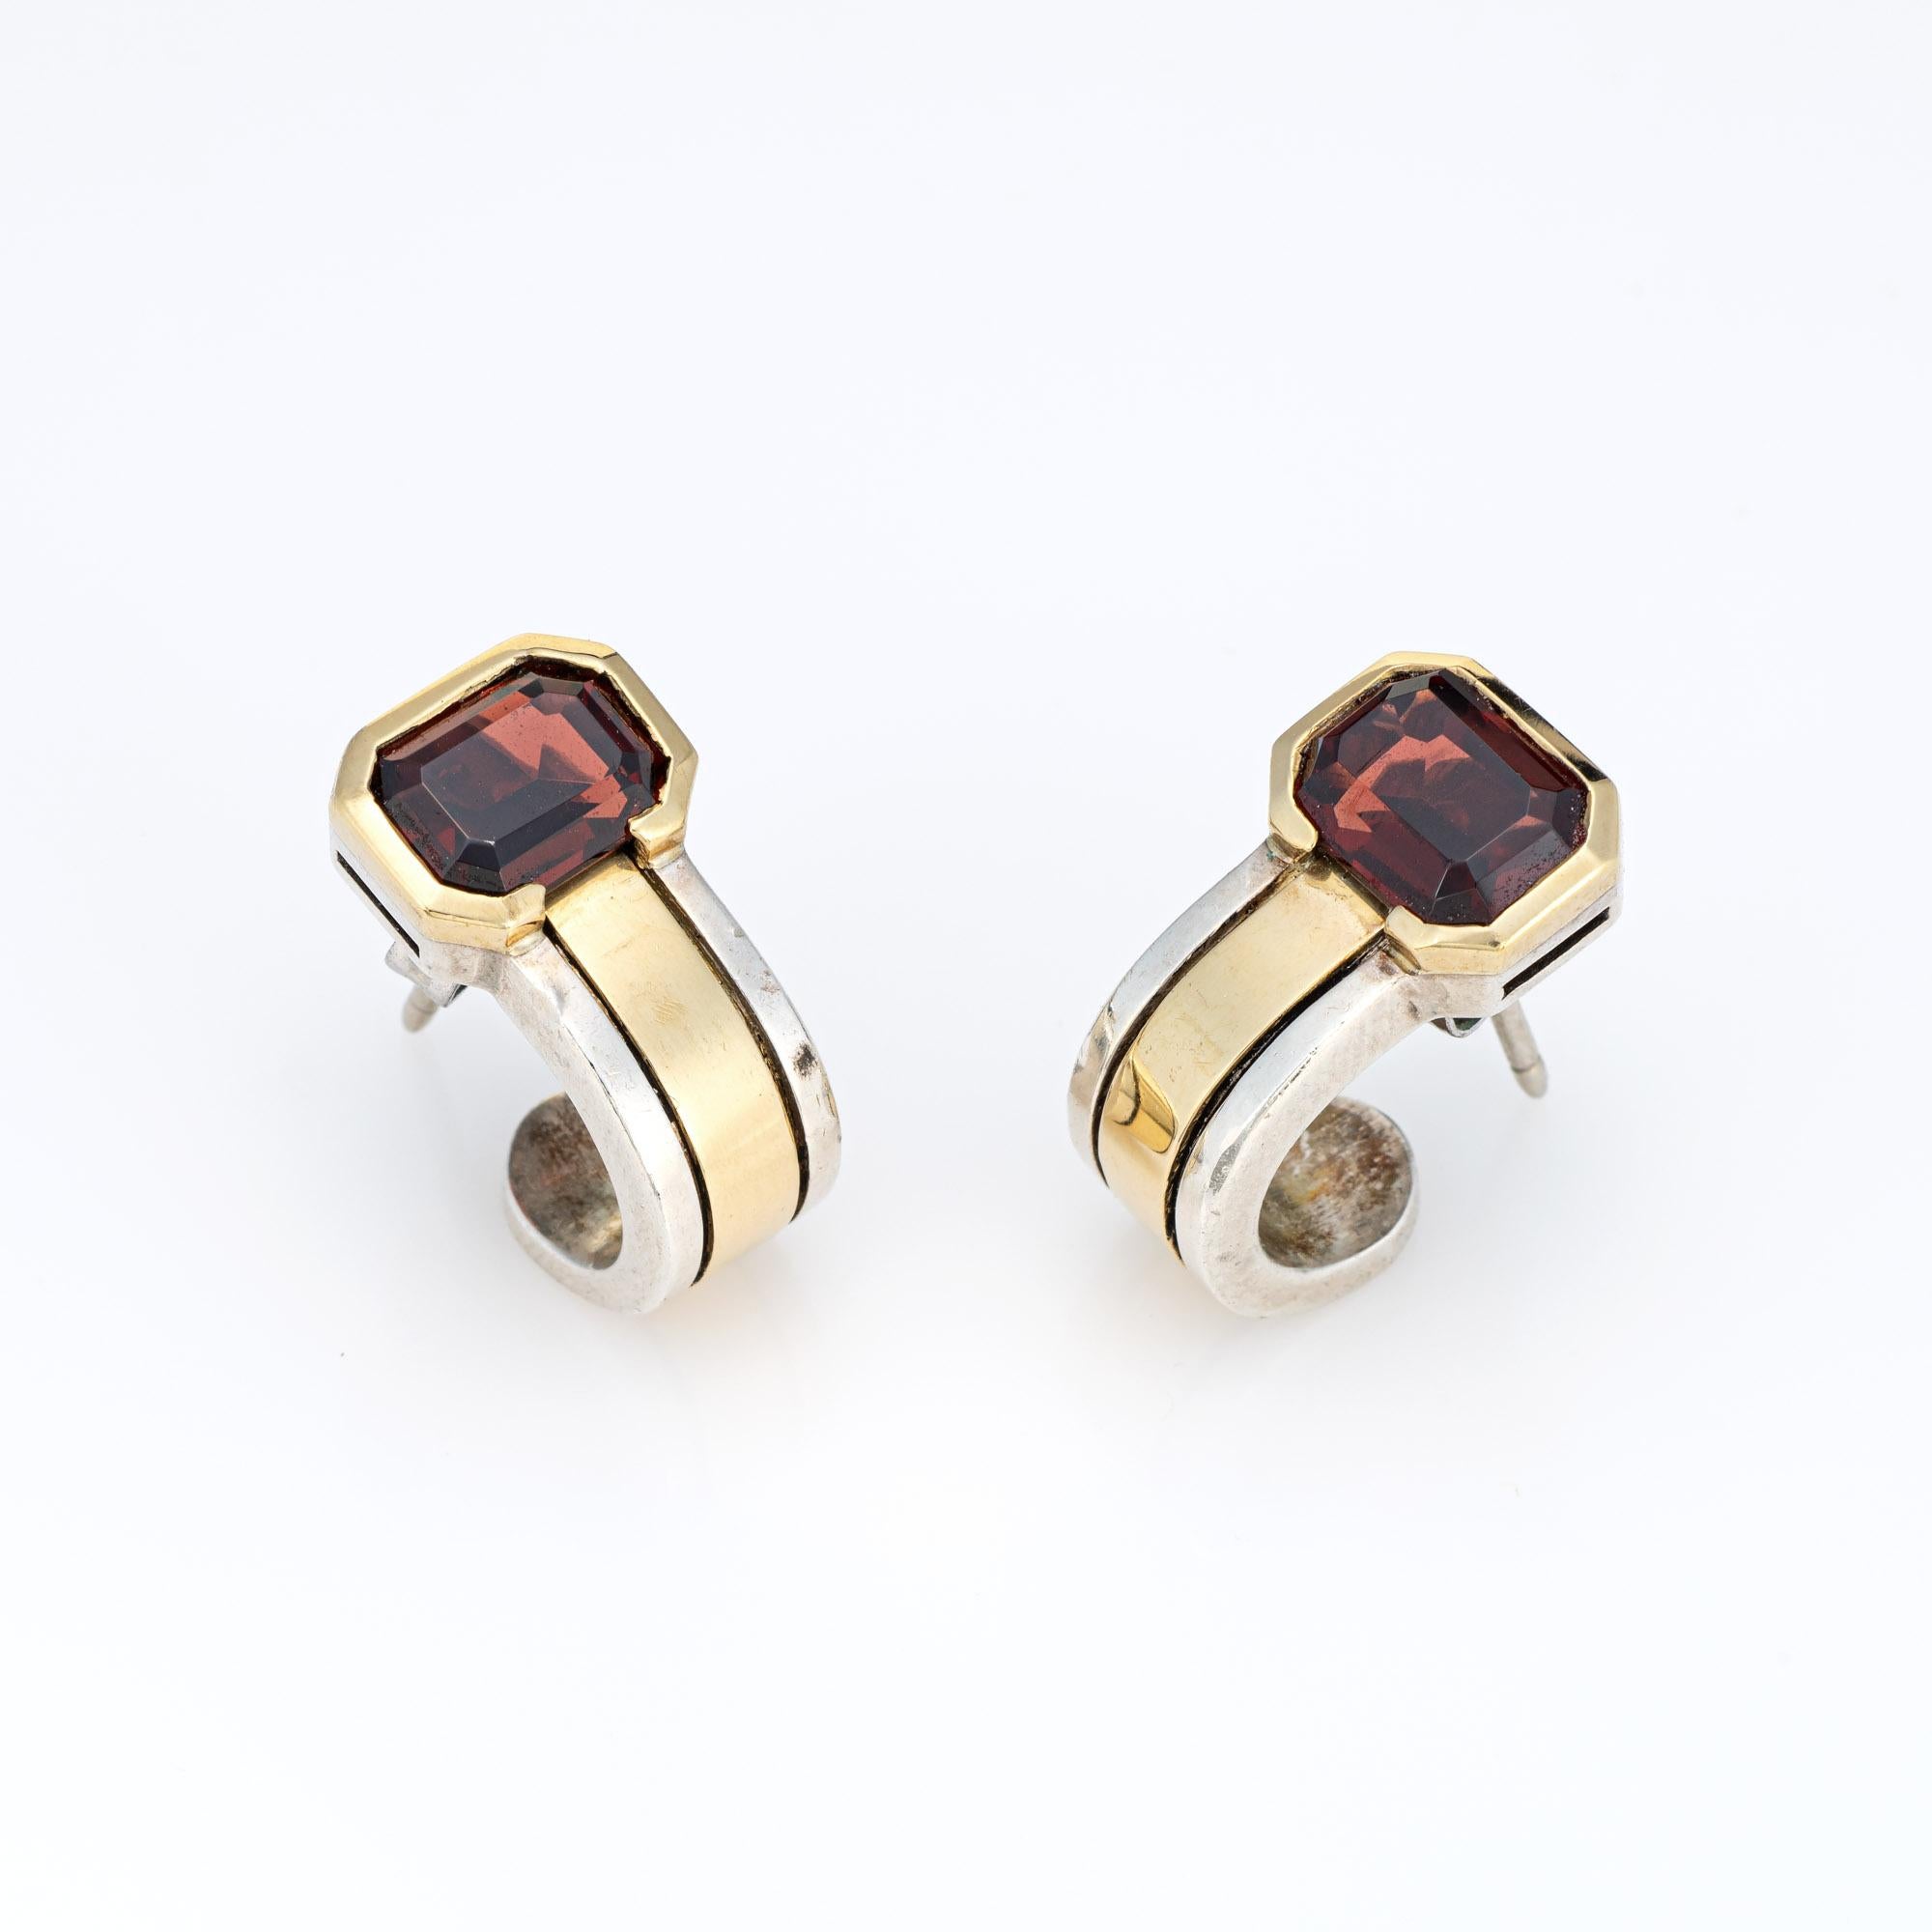 Stylish vintage Cartier garnet earrings crafted in sterling silver and 18 karat yellow gold (circa 1970s).  

Two garnets each measure 7.5mm x 5.5mm. The garnets are in very good condition and free of cracks or chips.
Designed in the Art Deco style,